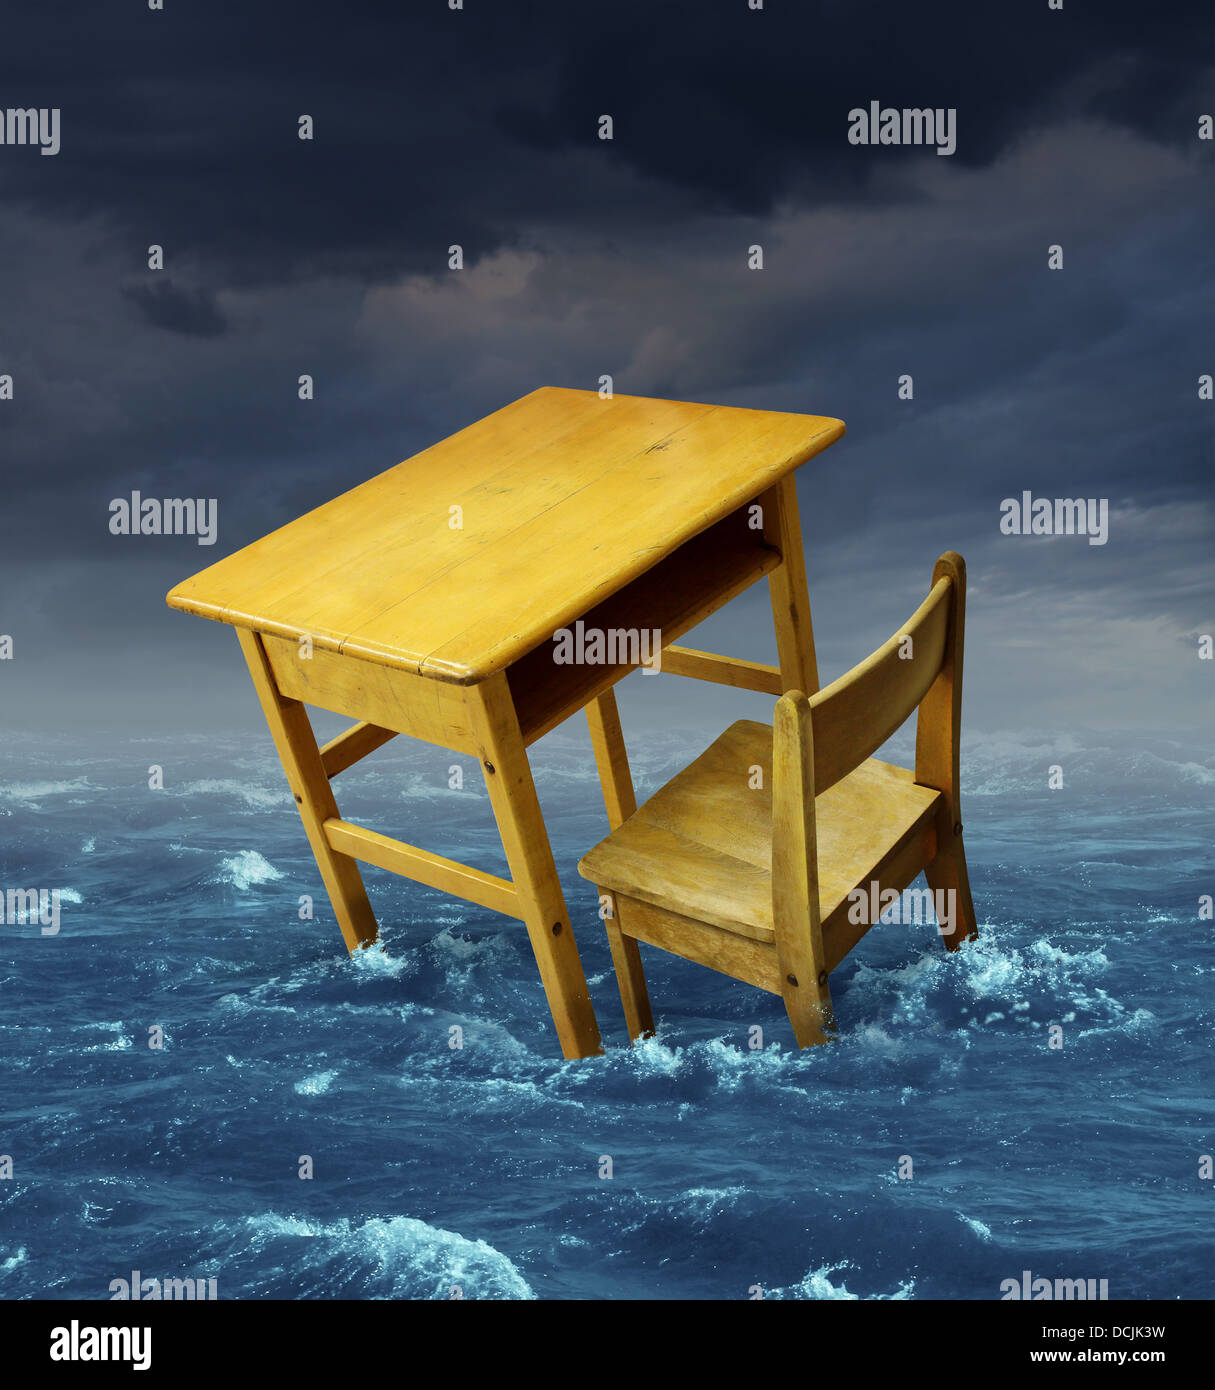 Education problems concept with an old school desk drowning in the water during a storm as a symbol of inaccessible schooling and funding challenges for special learning and literacy programs for underprivileged poor students. Stock Photo